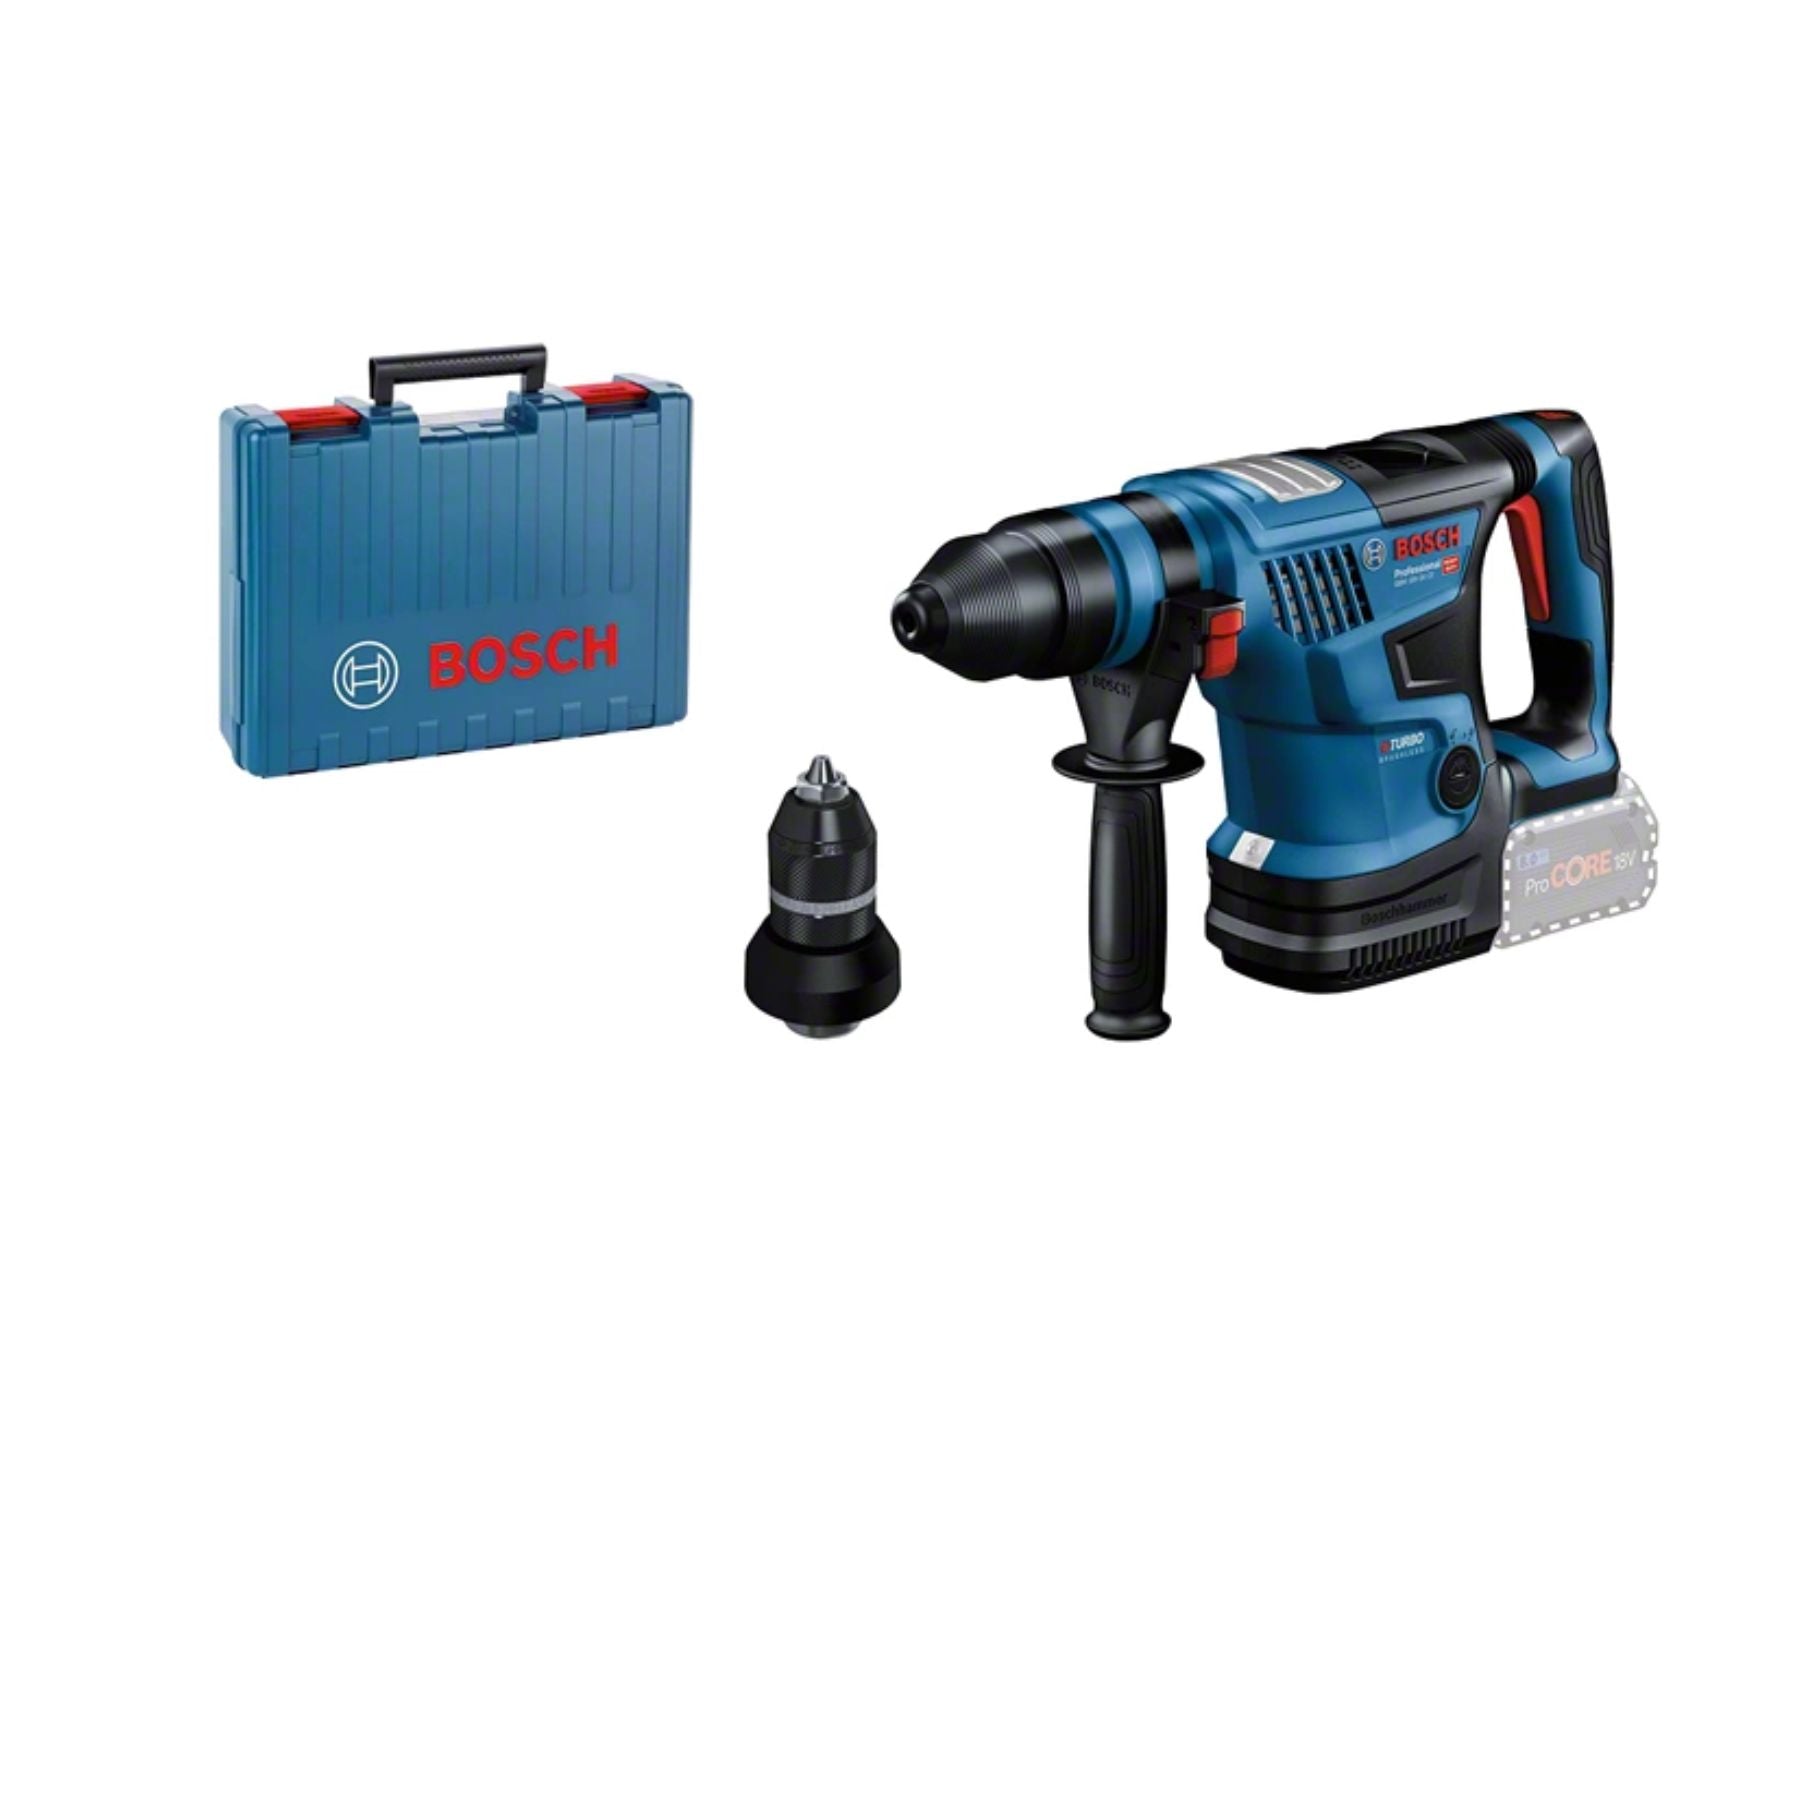 Bosh GBH 18V-34 CF (Solo) Cordless Rotary Hammer Biturbo with SDS plus - Bare Tool